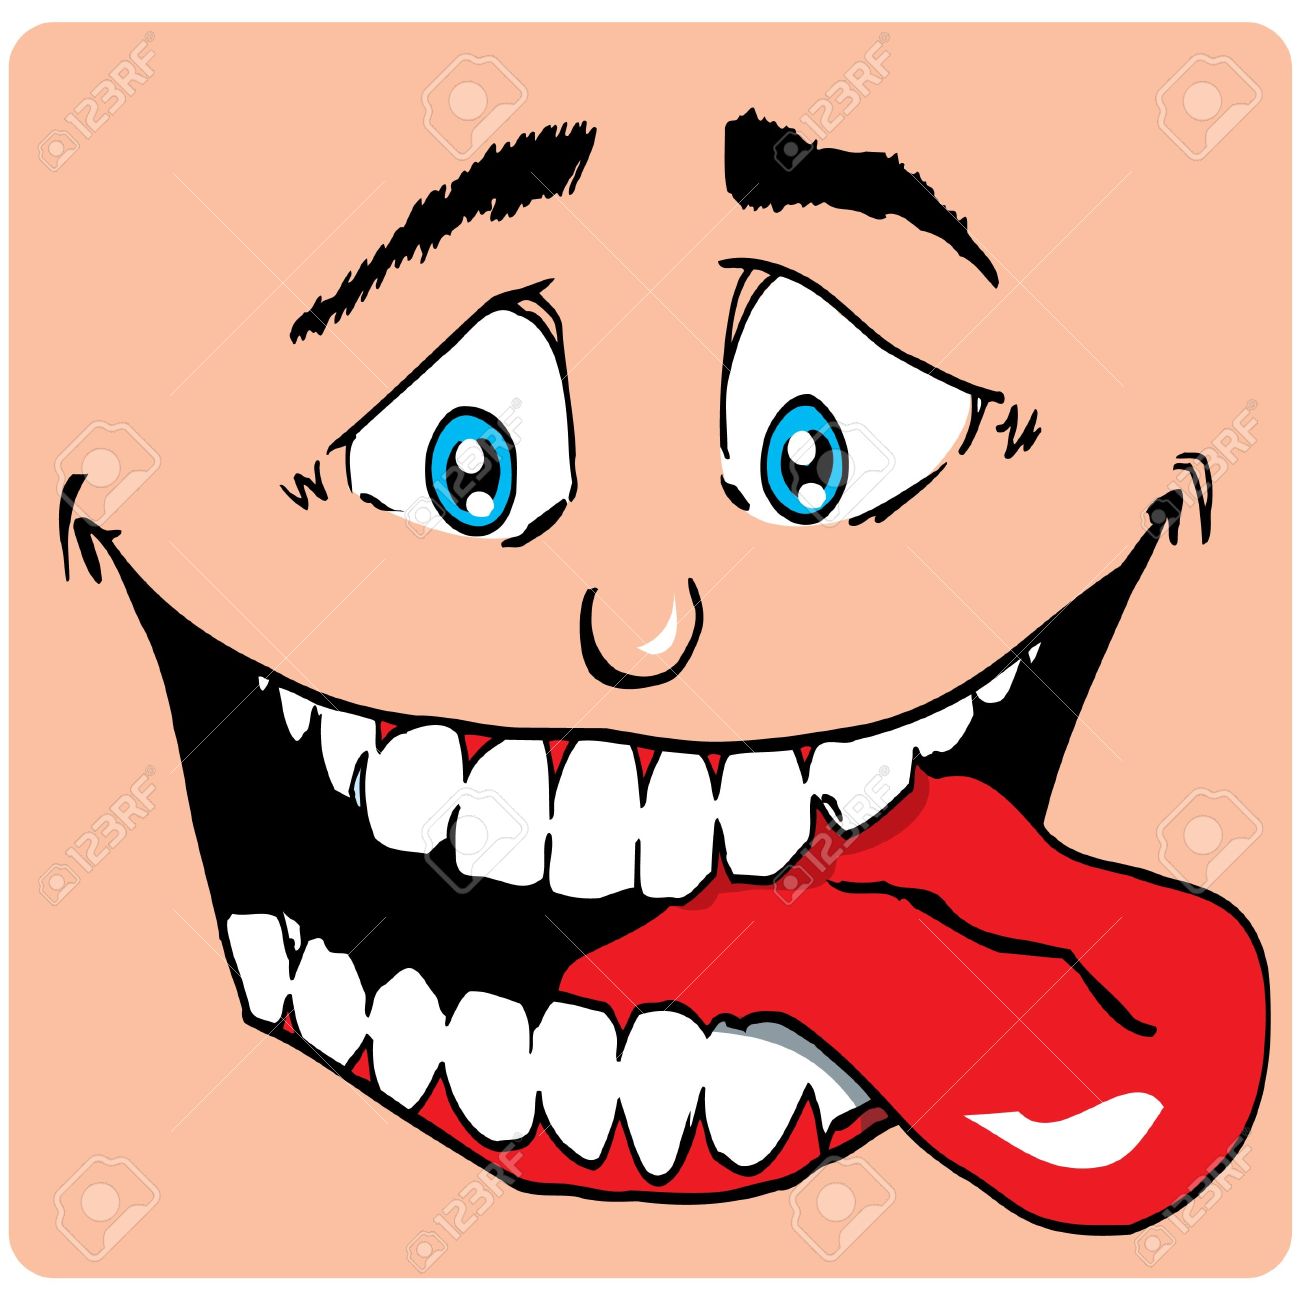 sticking with out face tongue Cartoon